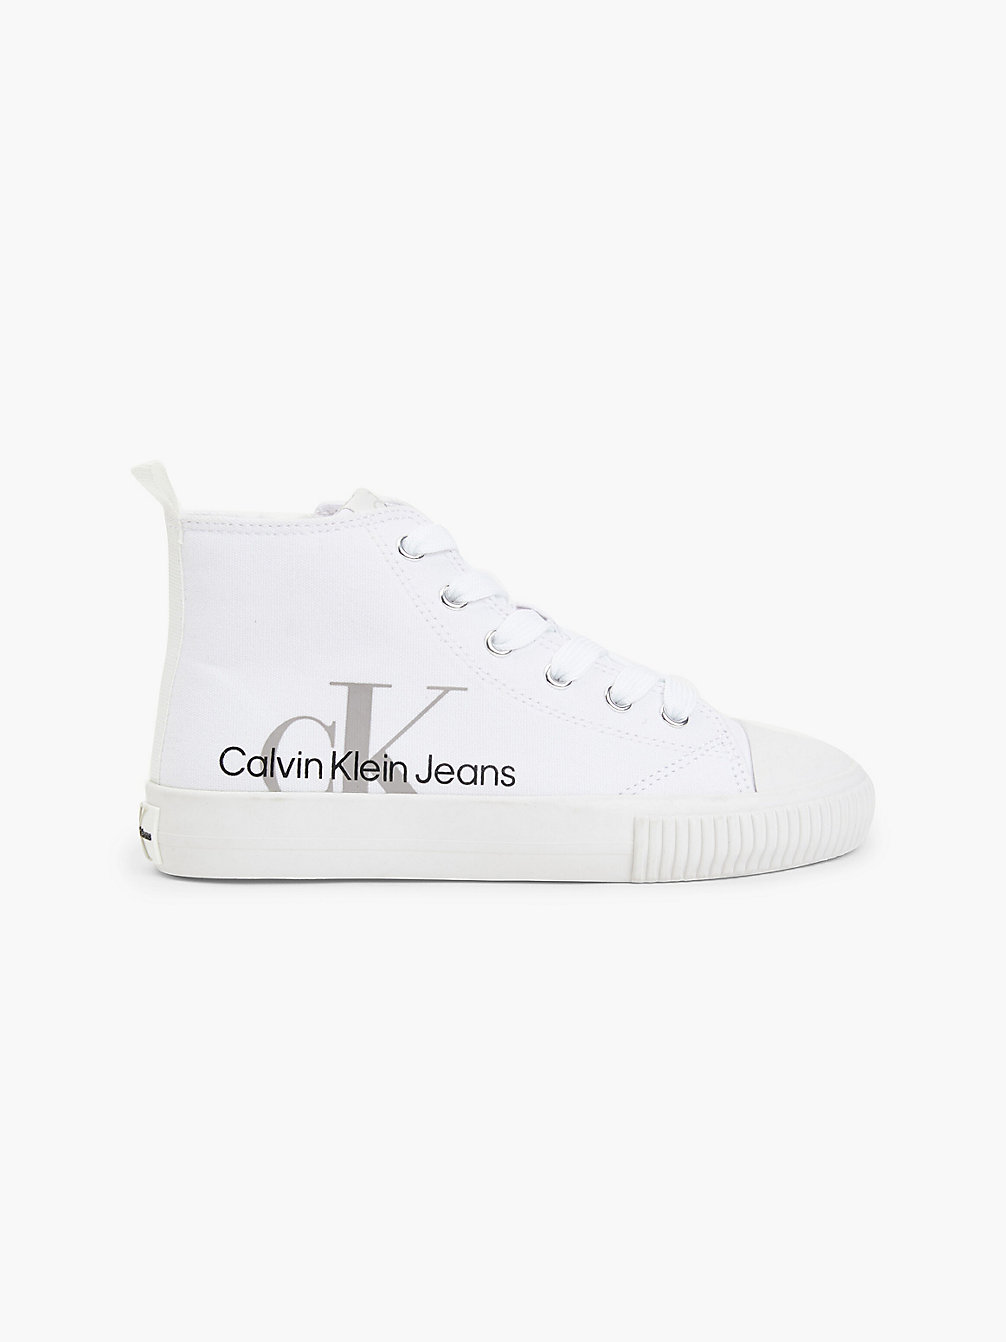 WHITE Recycled Canvas High-Top Trainers undefined kids unisex Calvin Klein